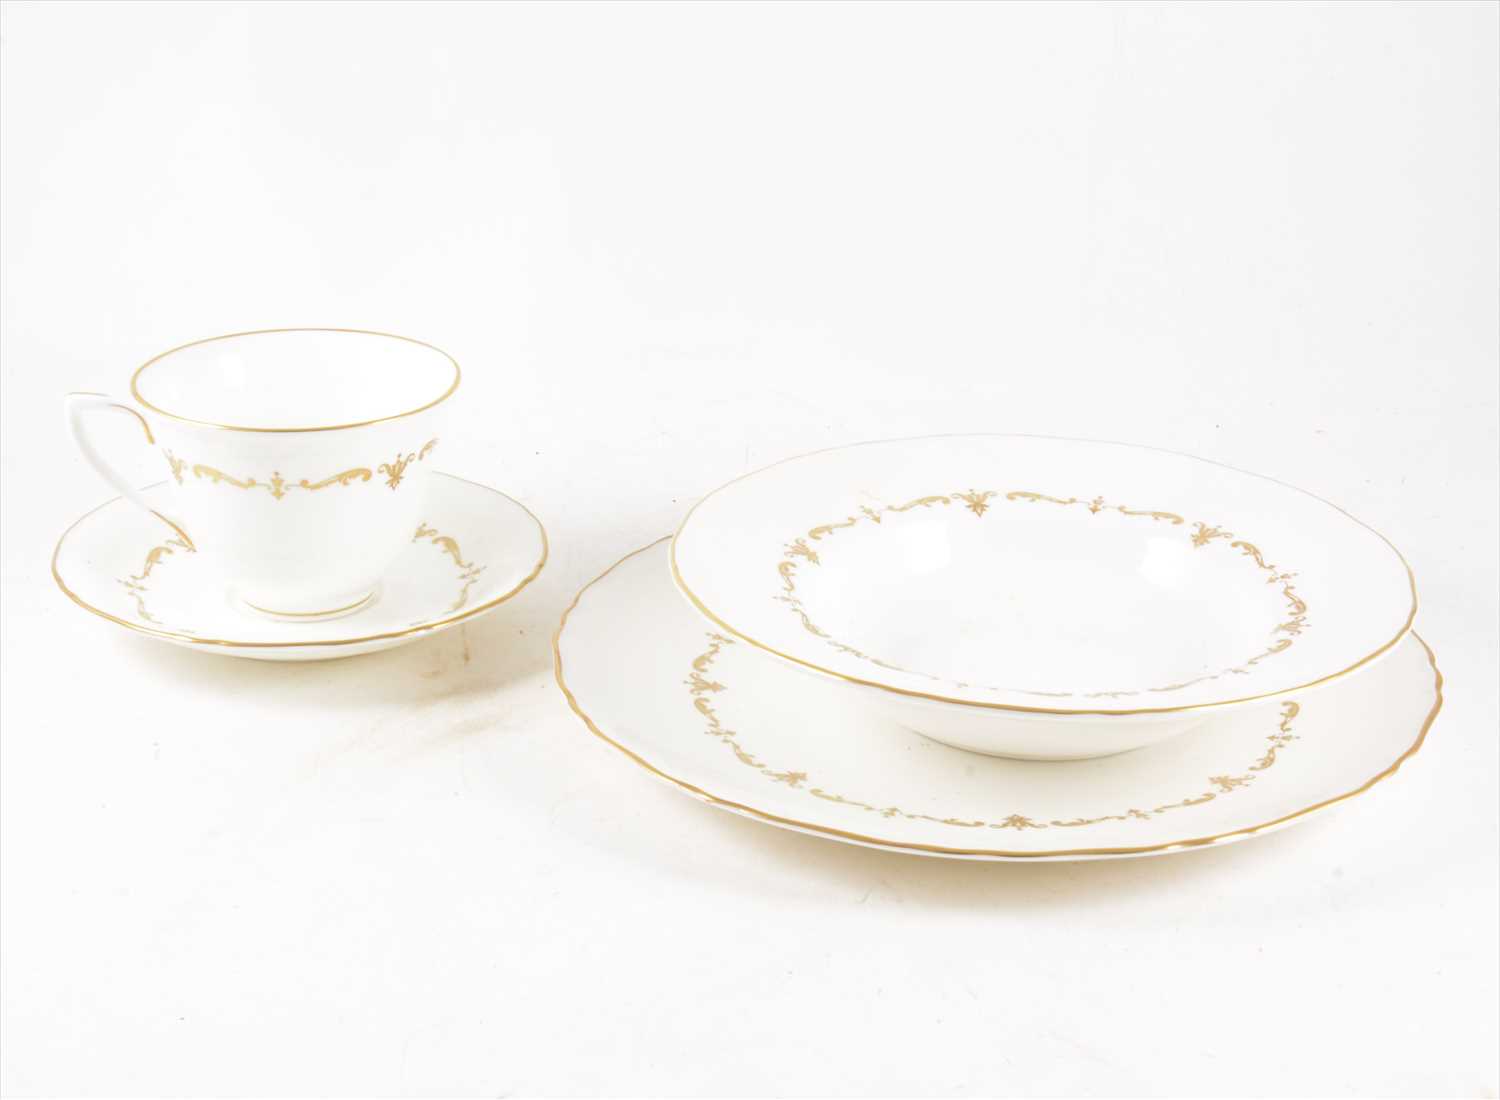 Lot 60 - A Royal Worcester bone china table service, 'Gold Chantilly' pattern